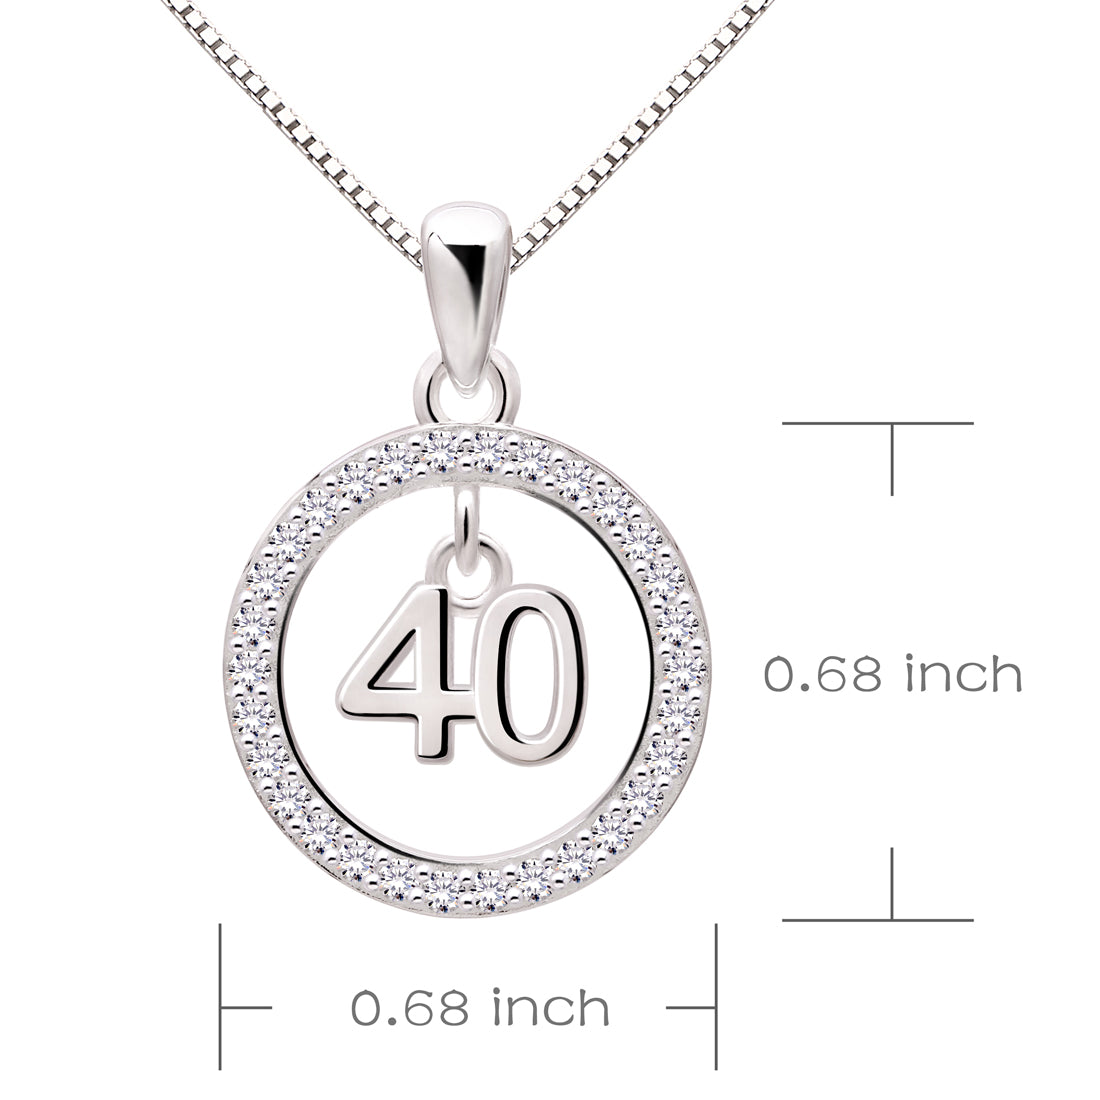 ALOV Jewelry Sterling Silver 40th Birthday Anniversary Lucky Number 40 Cubic Zirconia Pendant Necklace